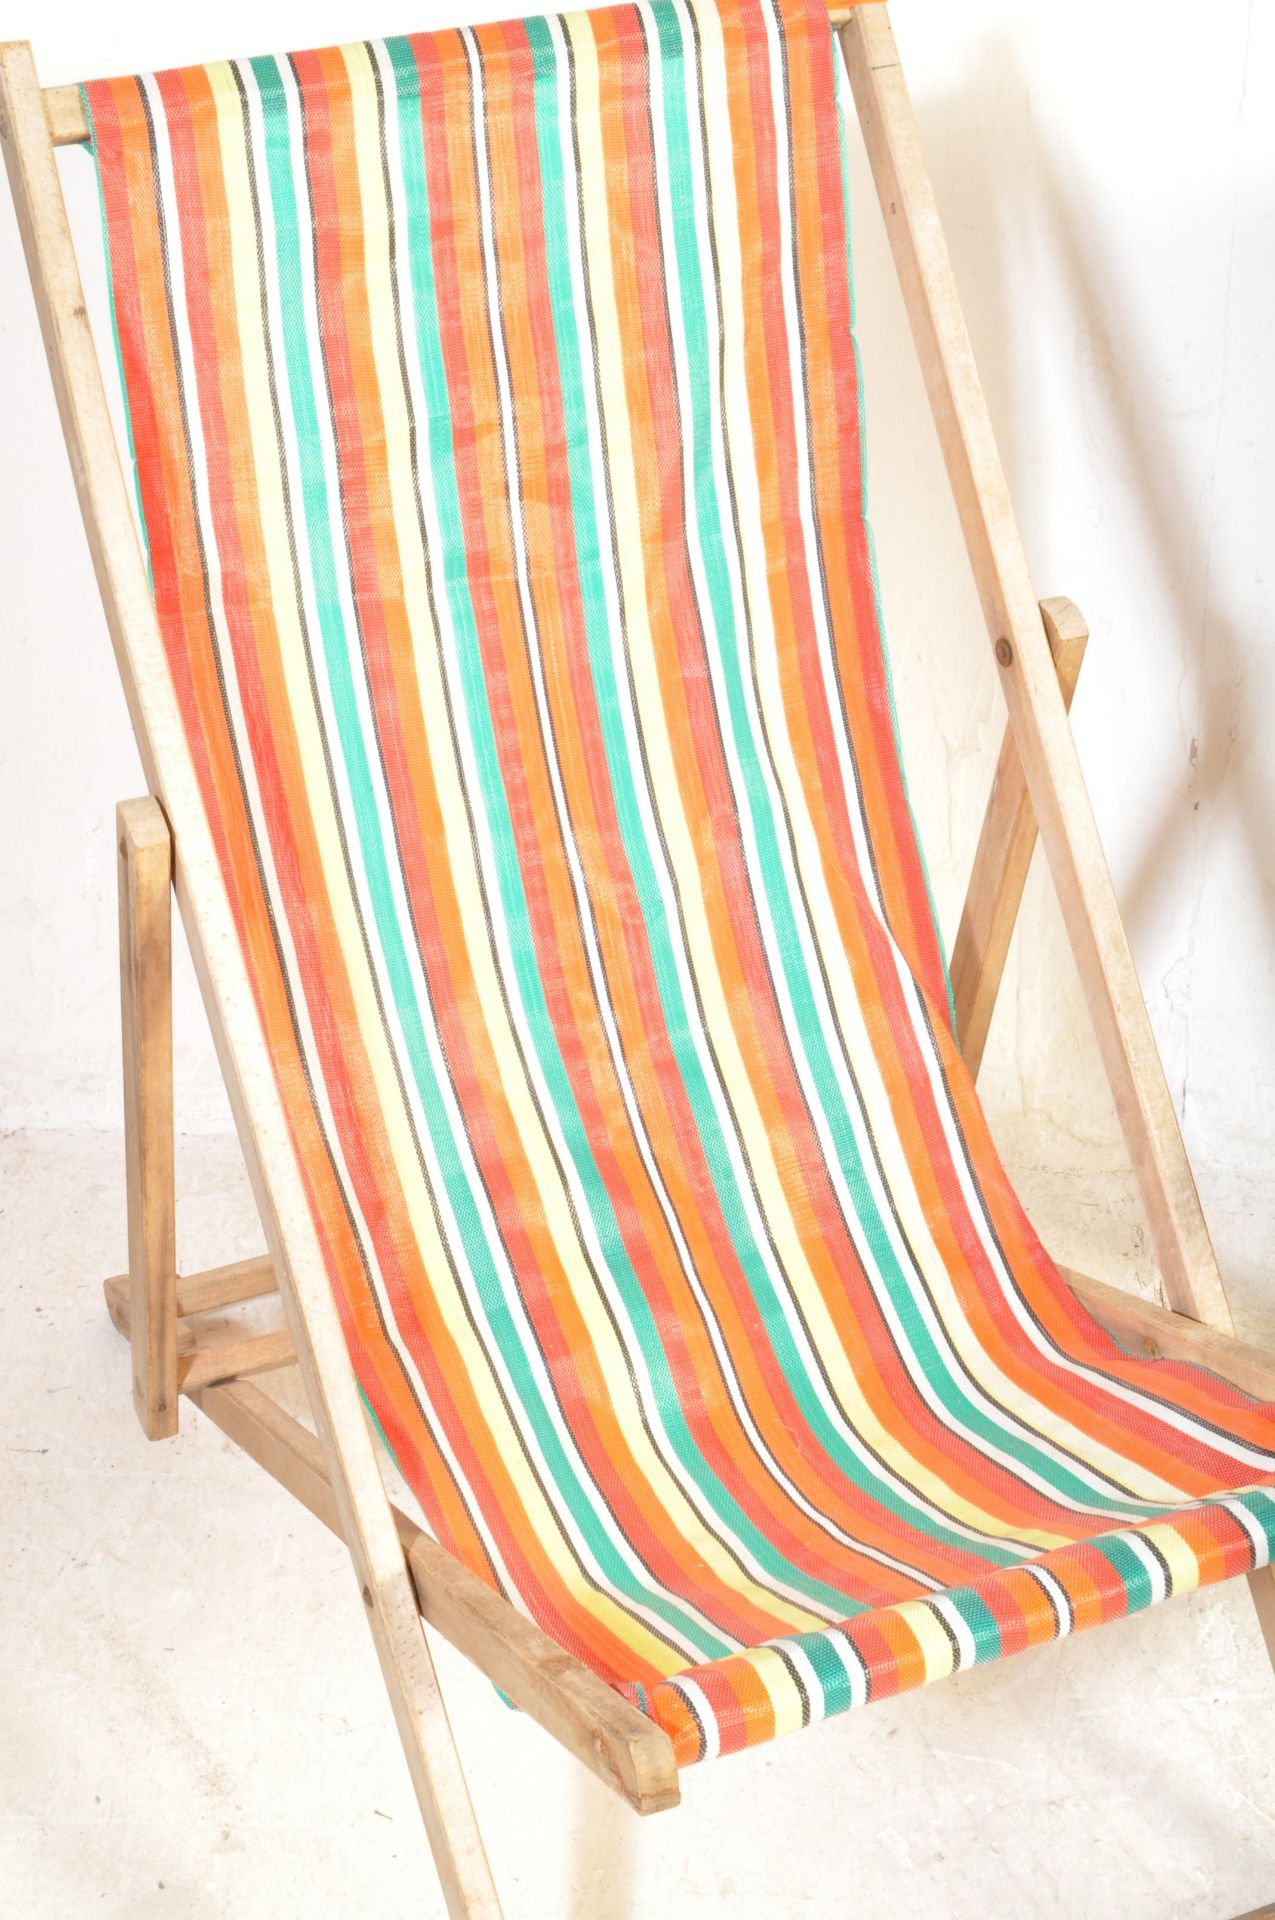 THREE VINTAGE STRIPED BEACH DECK CHAIRS - Image 2 of 5